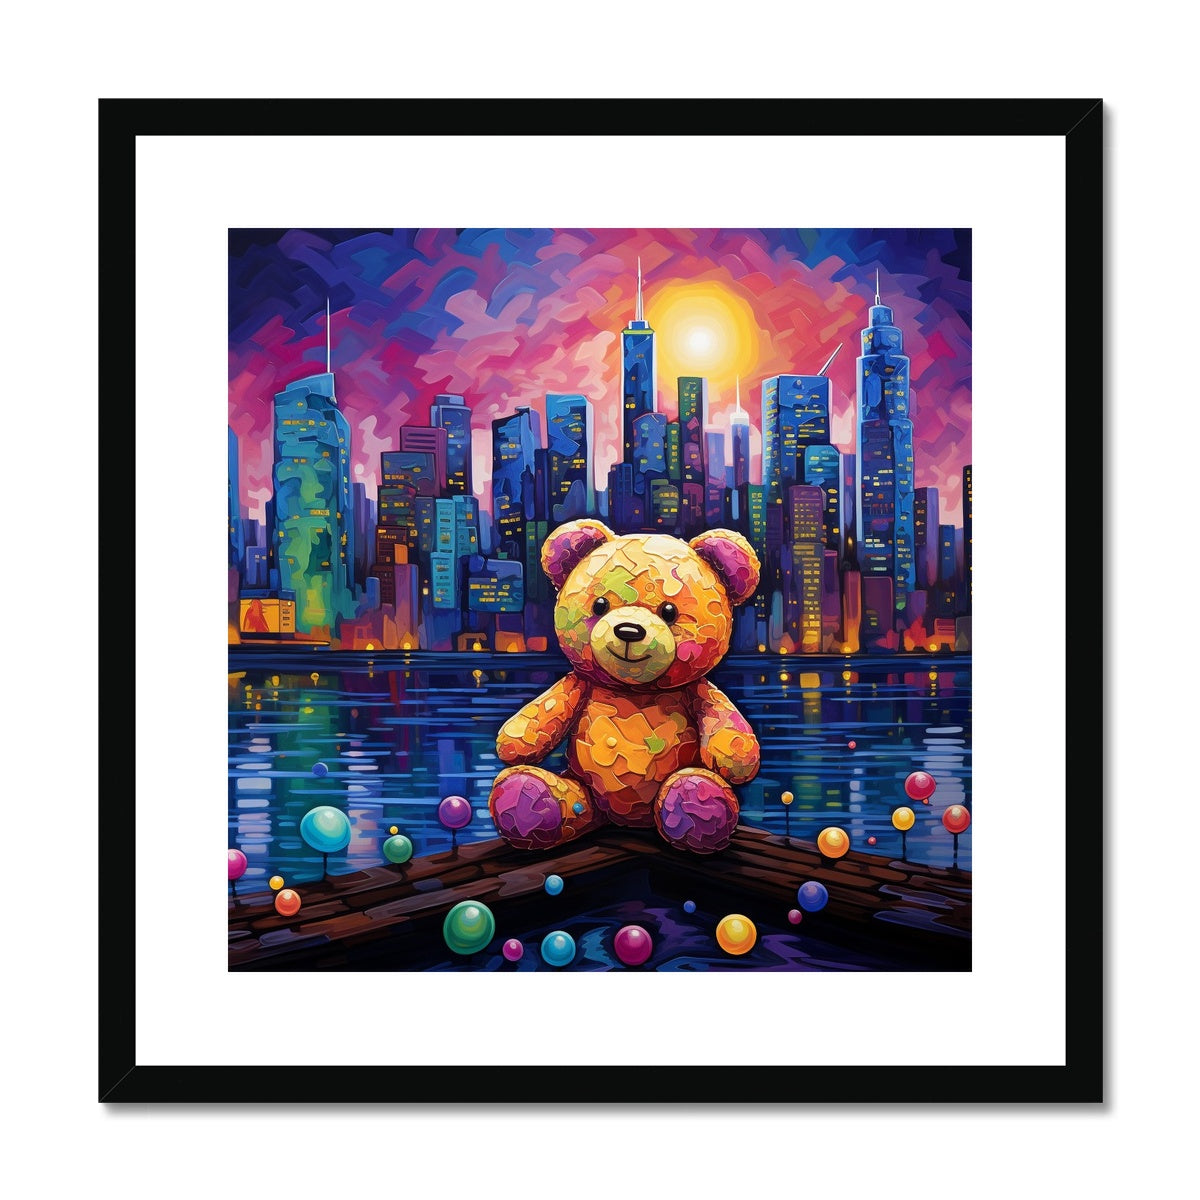 Skyline Attraction: Limited Edition Framed & Mounted Print